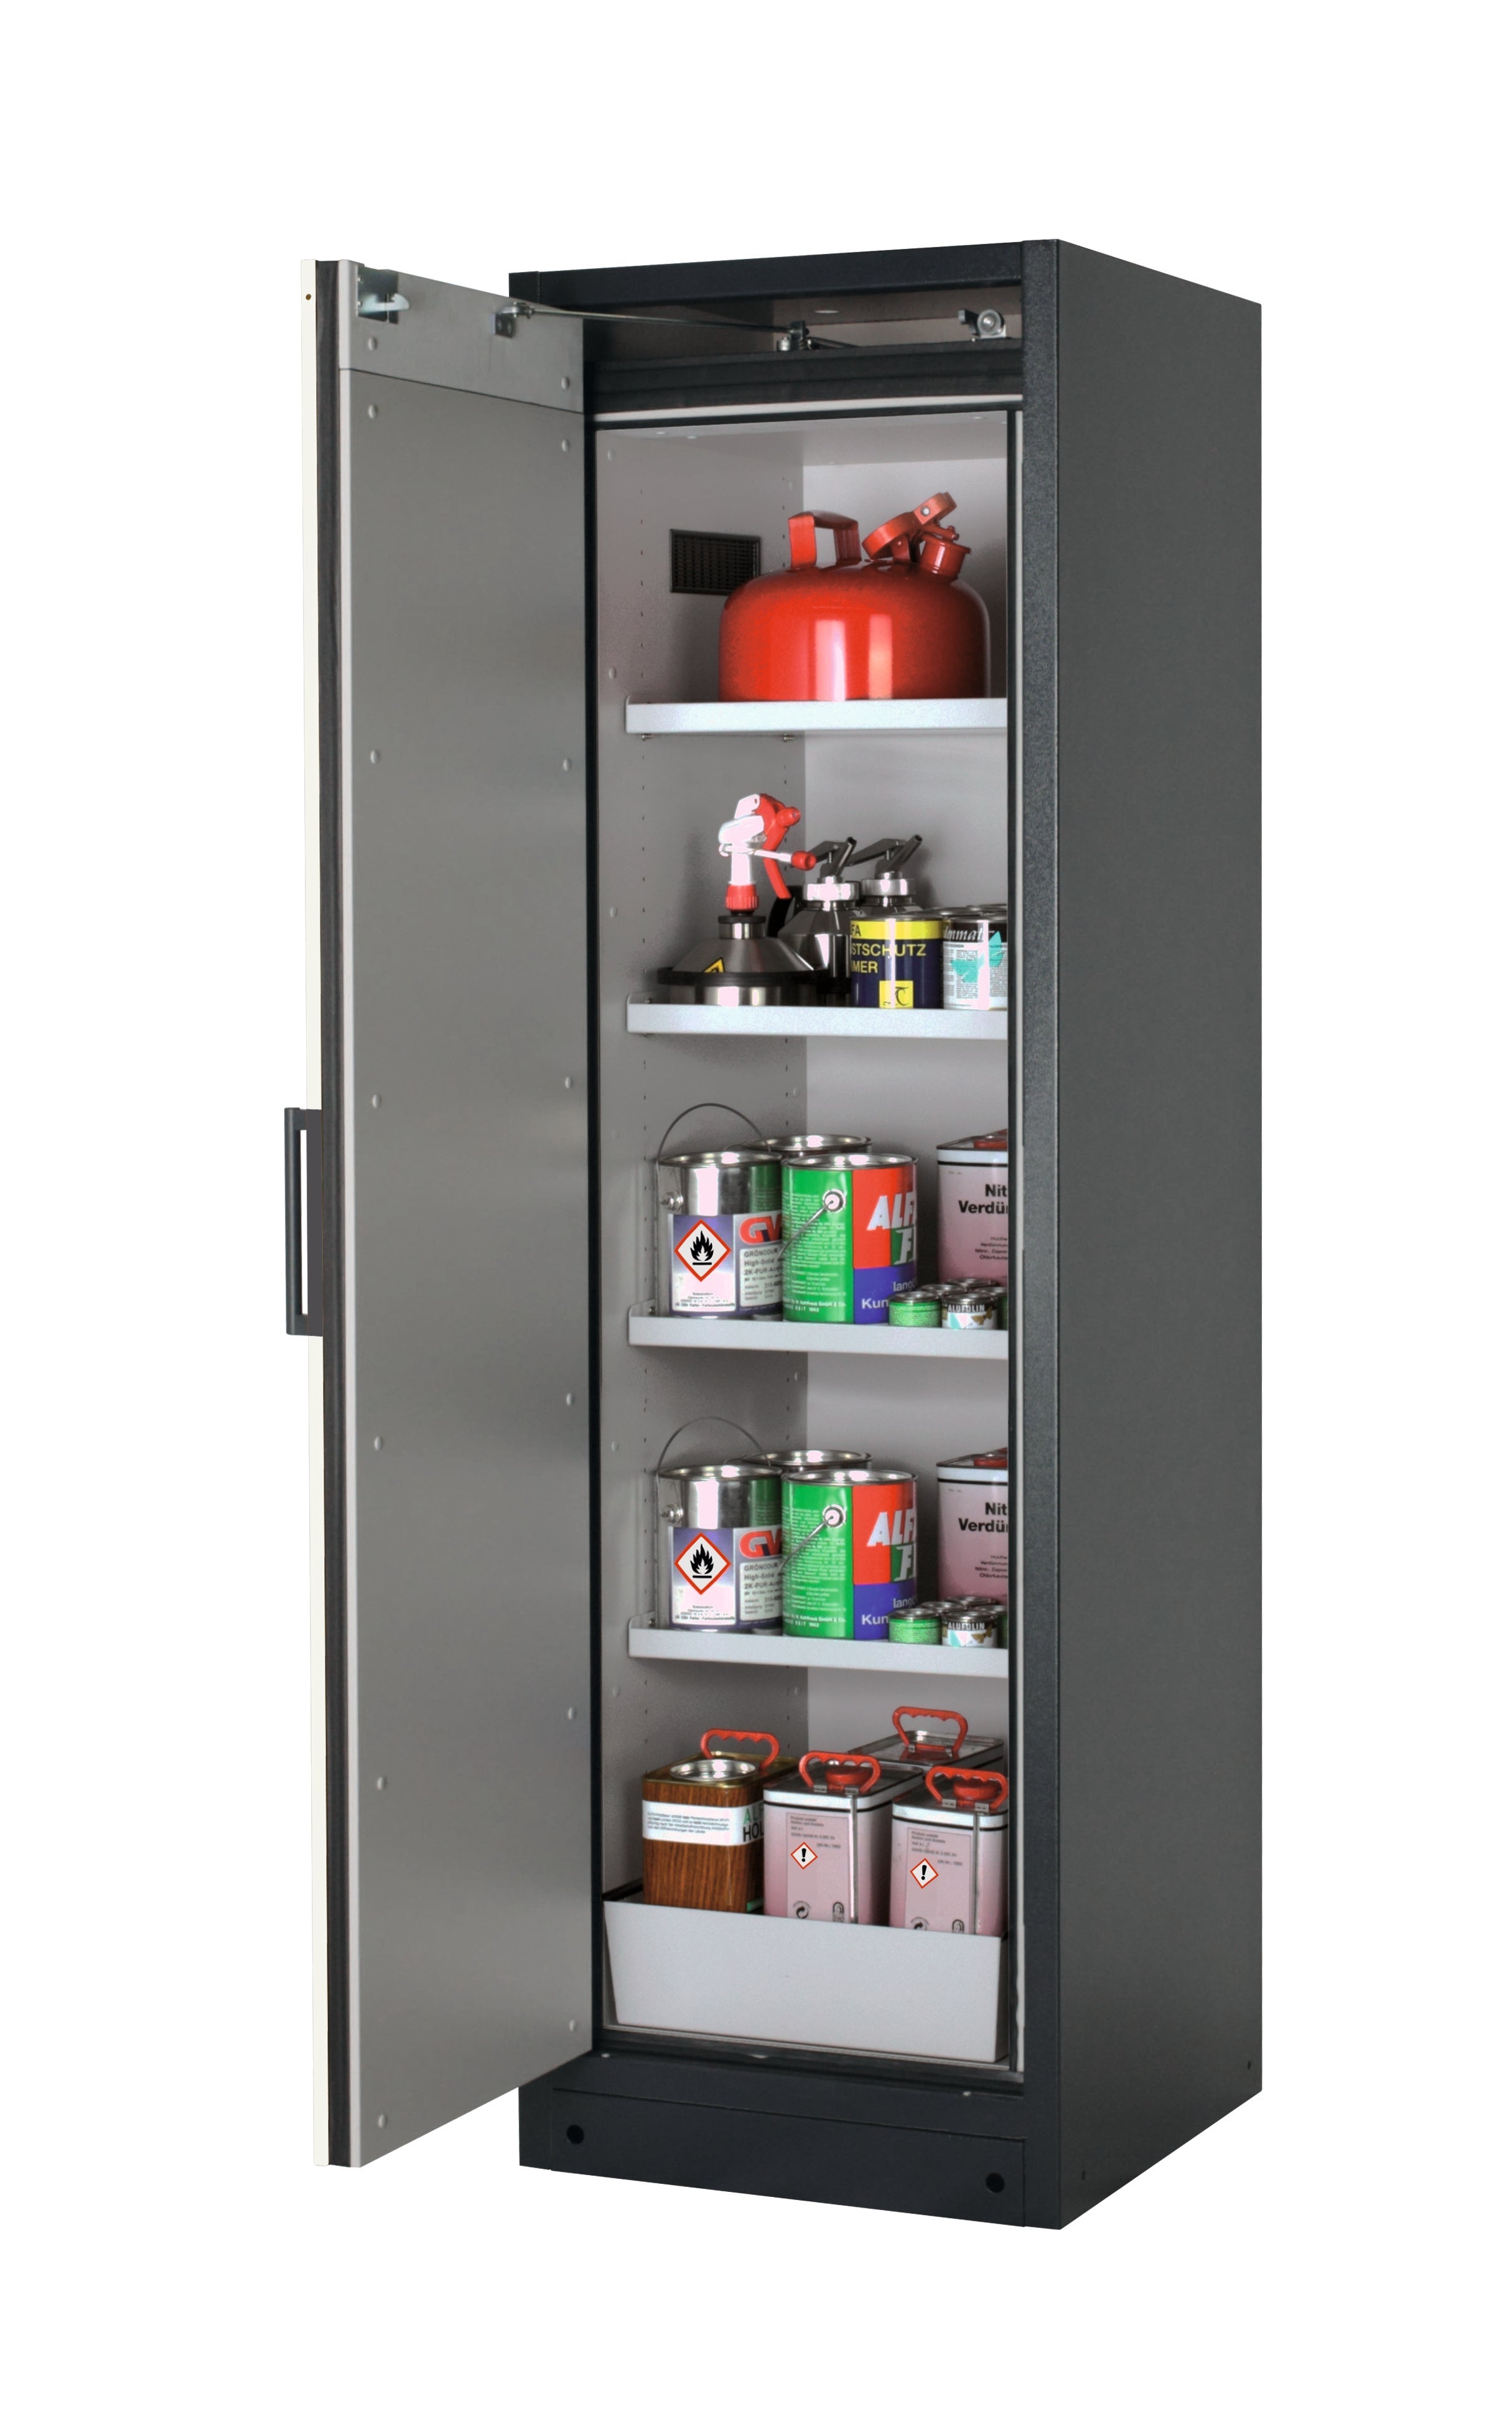 Type 90 safety storage cabinet Q-PEGASUS-90 model Q90.195.060.WDAC in asecos silver with 4x shelf standard (sheet steel),